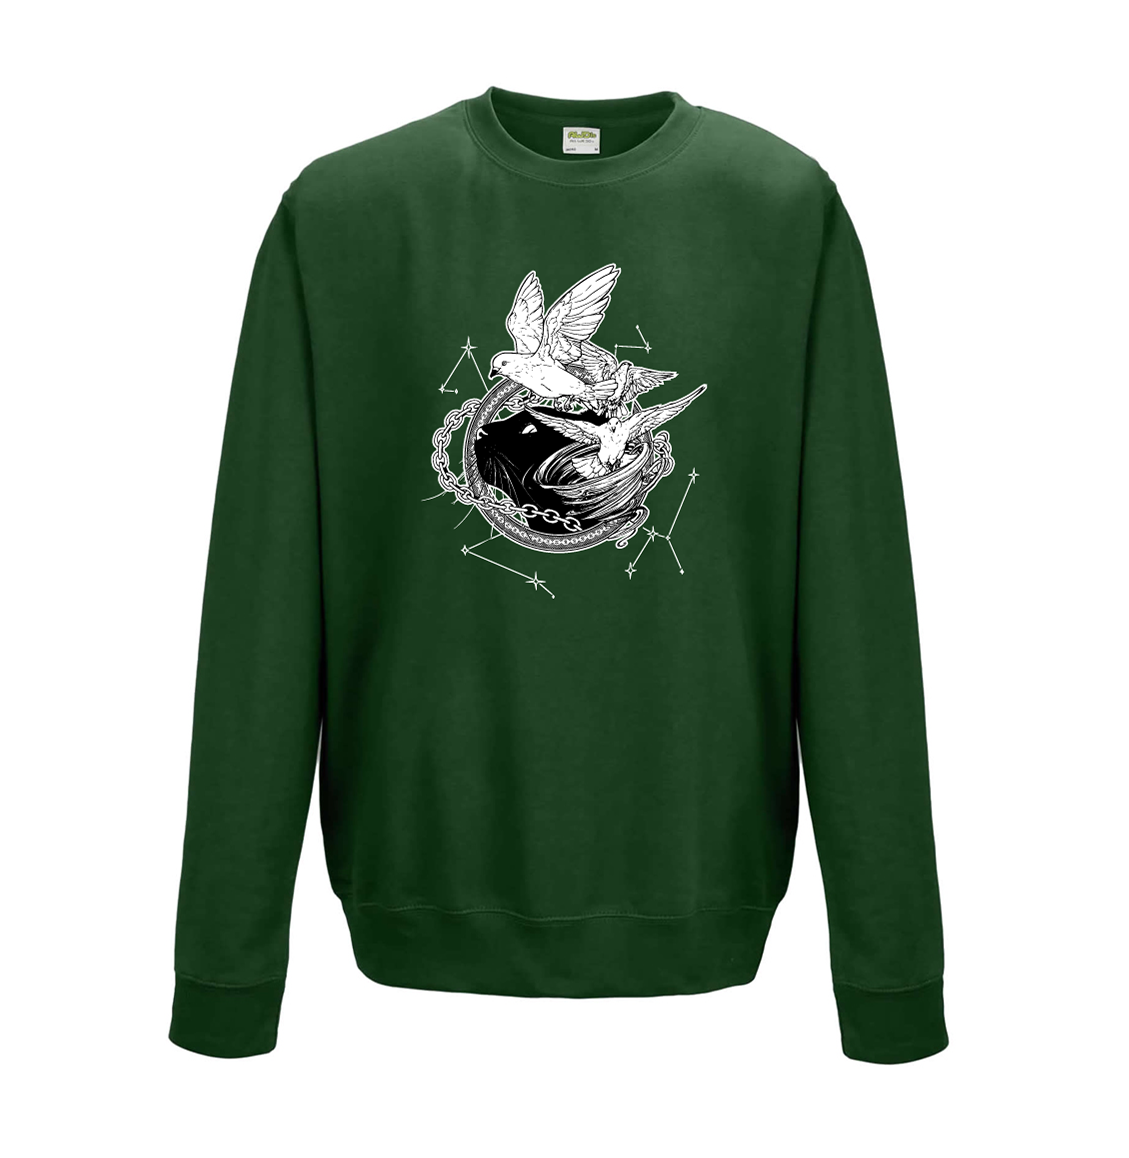 Green sweatshirt with white illustration of Dustspinners, constellations, and chains swirling around Faithful the cat